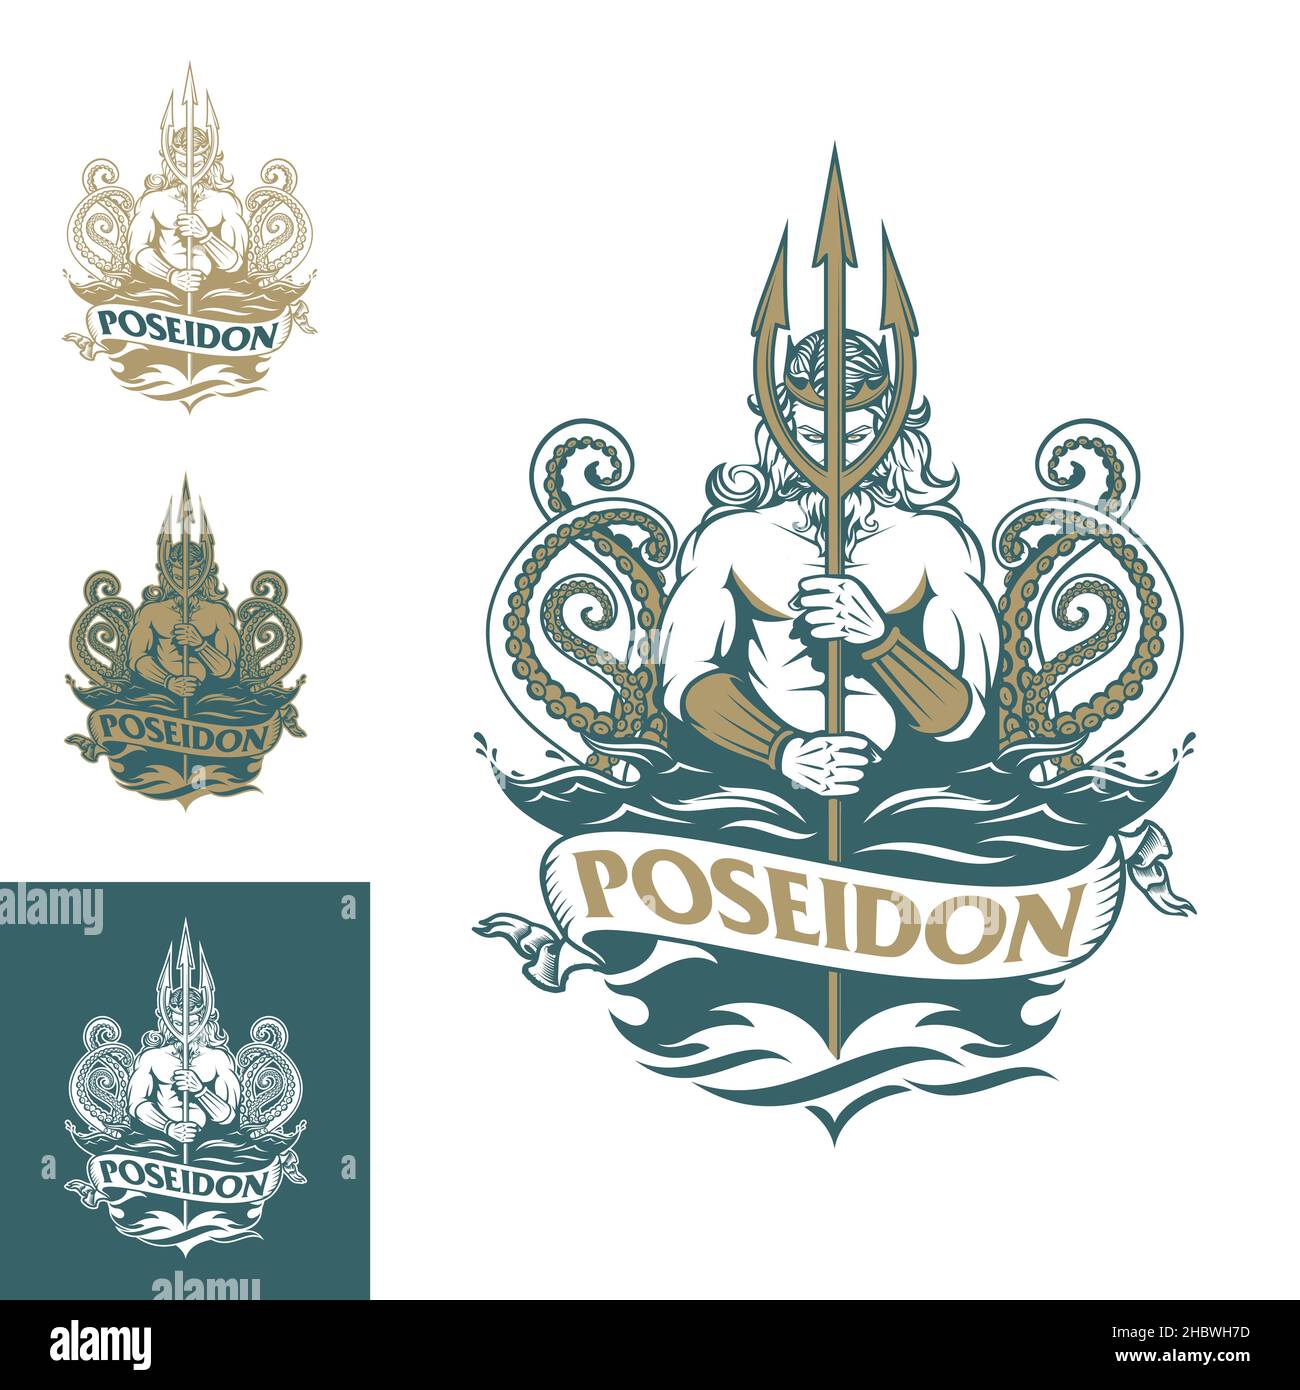 Poseidon and kraken insignia vector format for poster, tshirt print, symbol, or any other purpose. Stock Vector